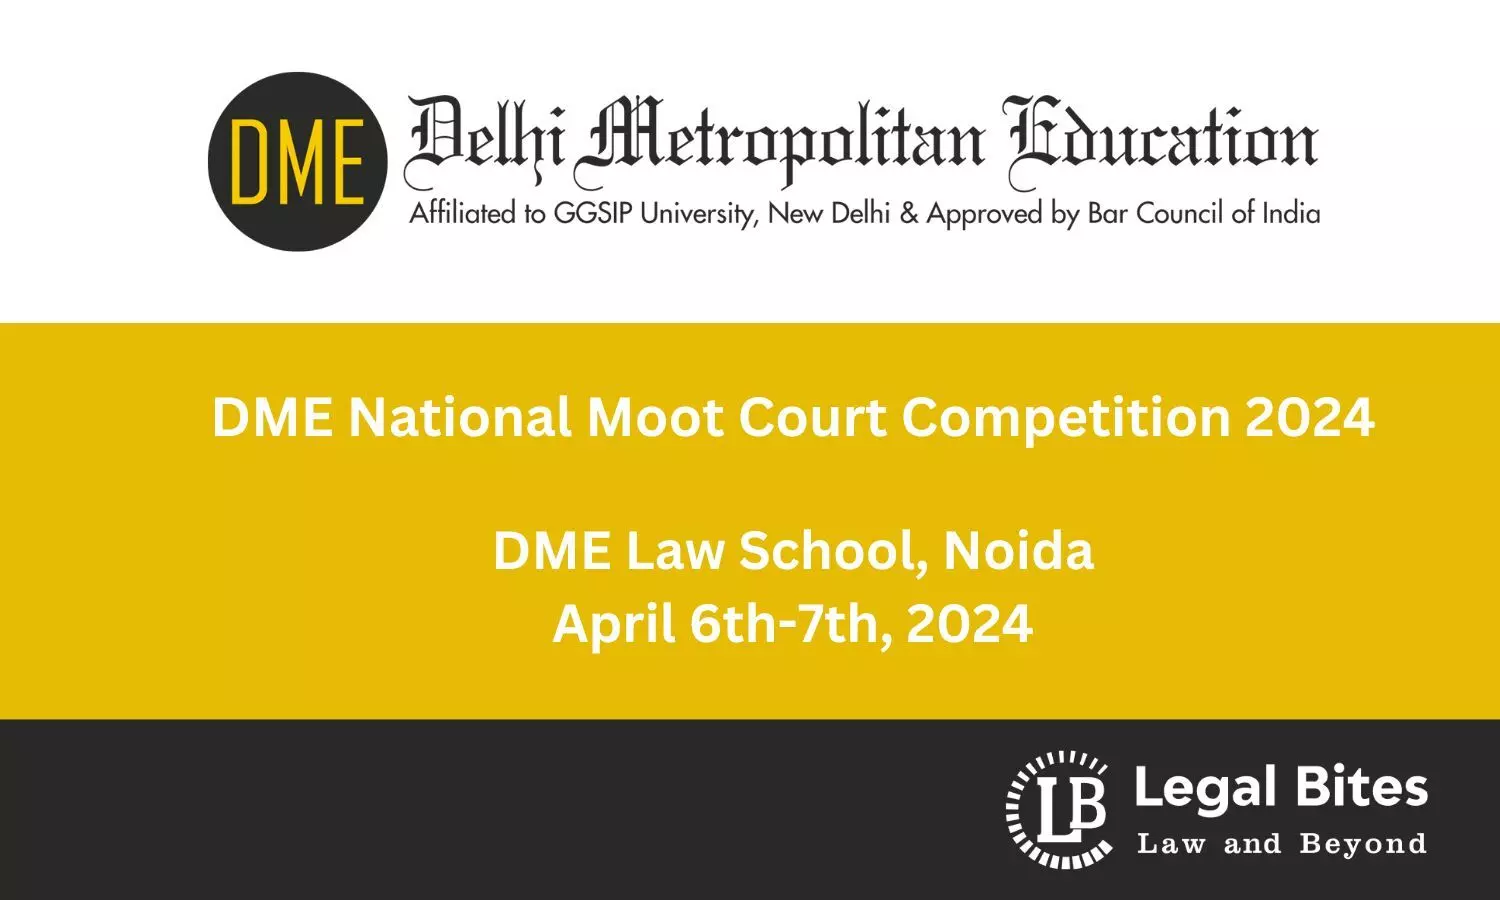 DME National Moot Court Competition 2024 | Register by 12th March